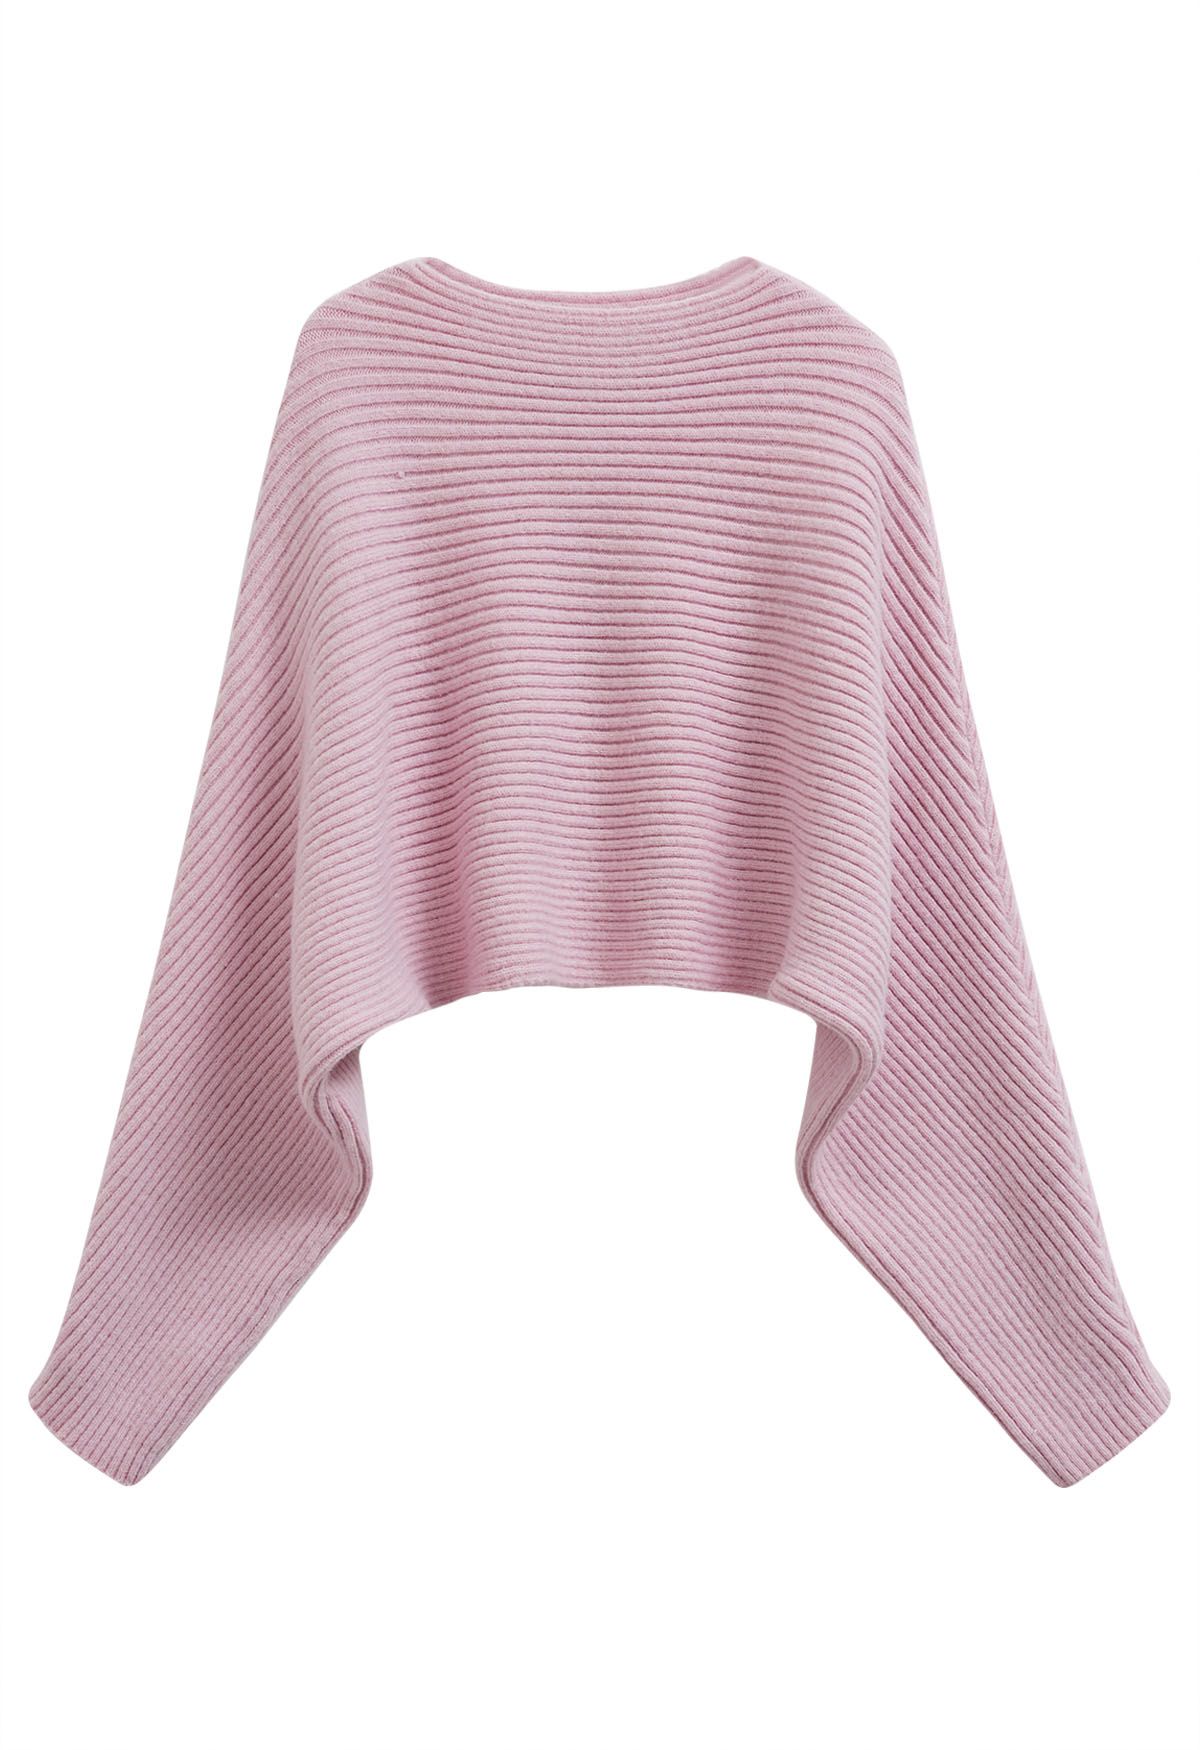 Dramatic Batwing Sleeve Ribbed Knit Sweater in Pink